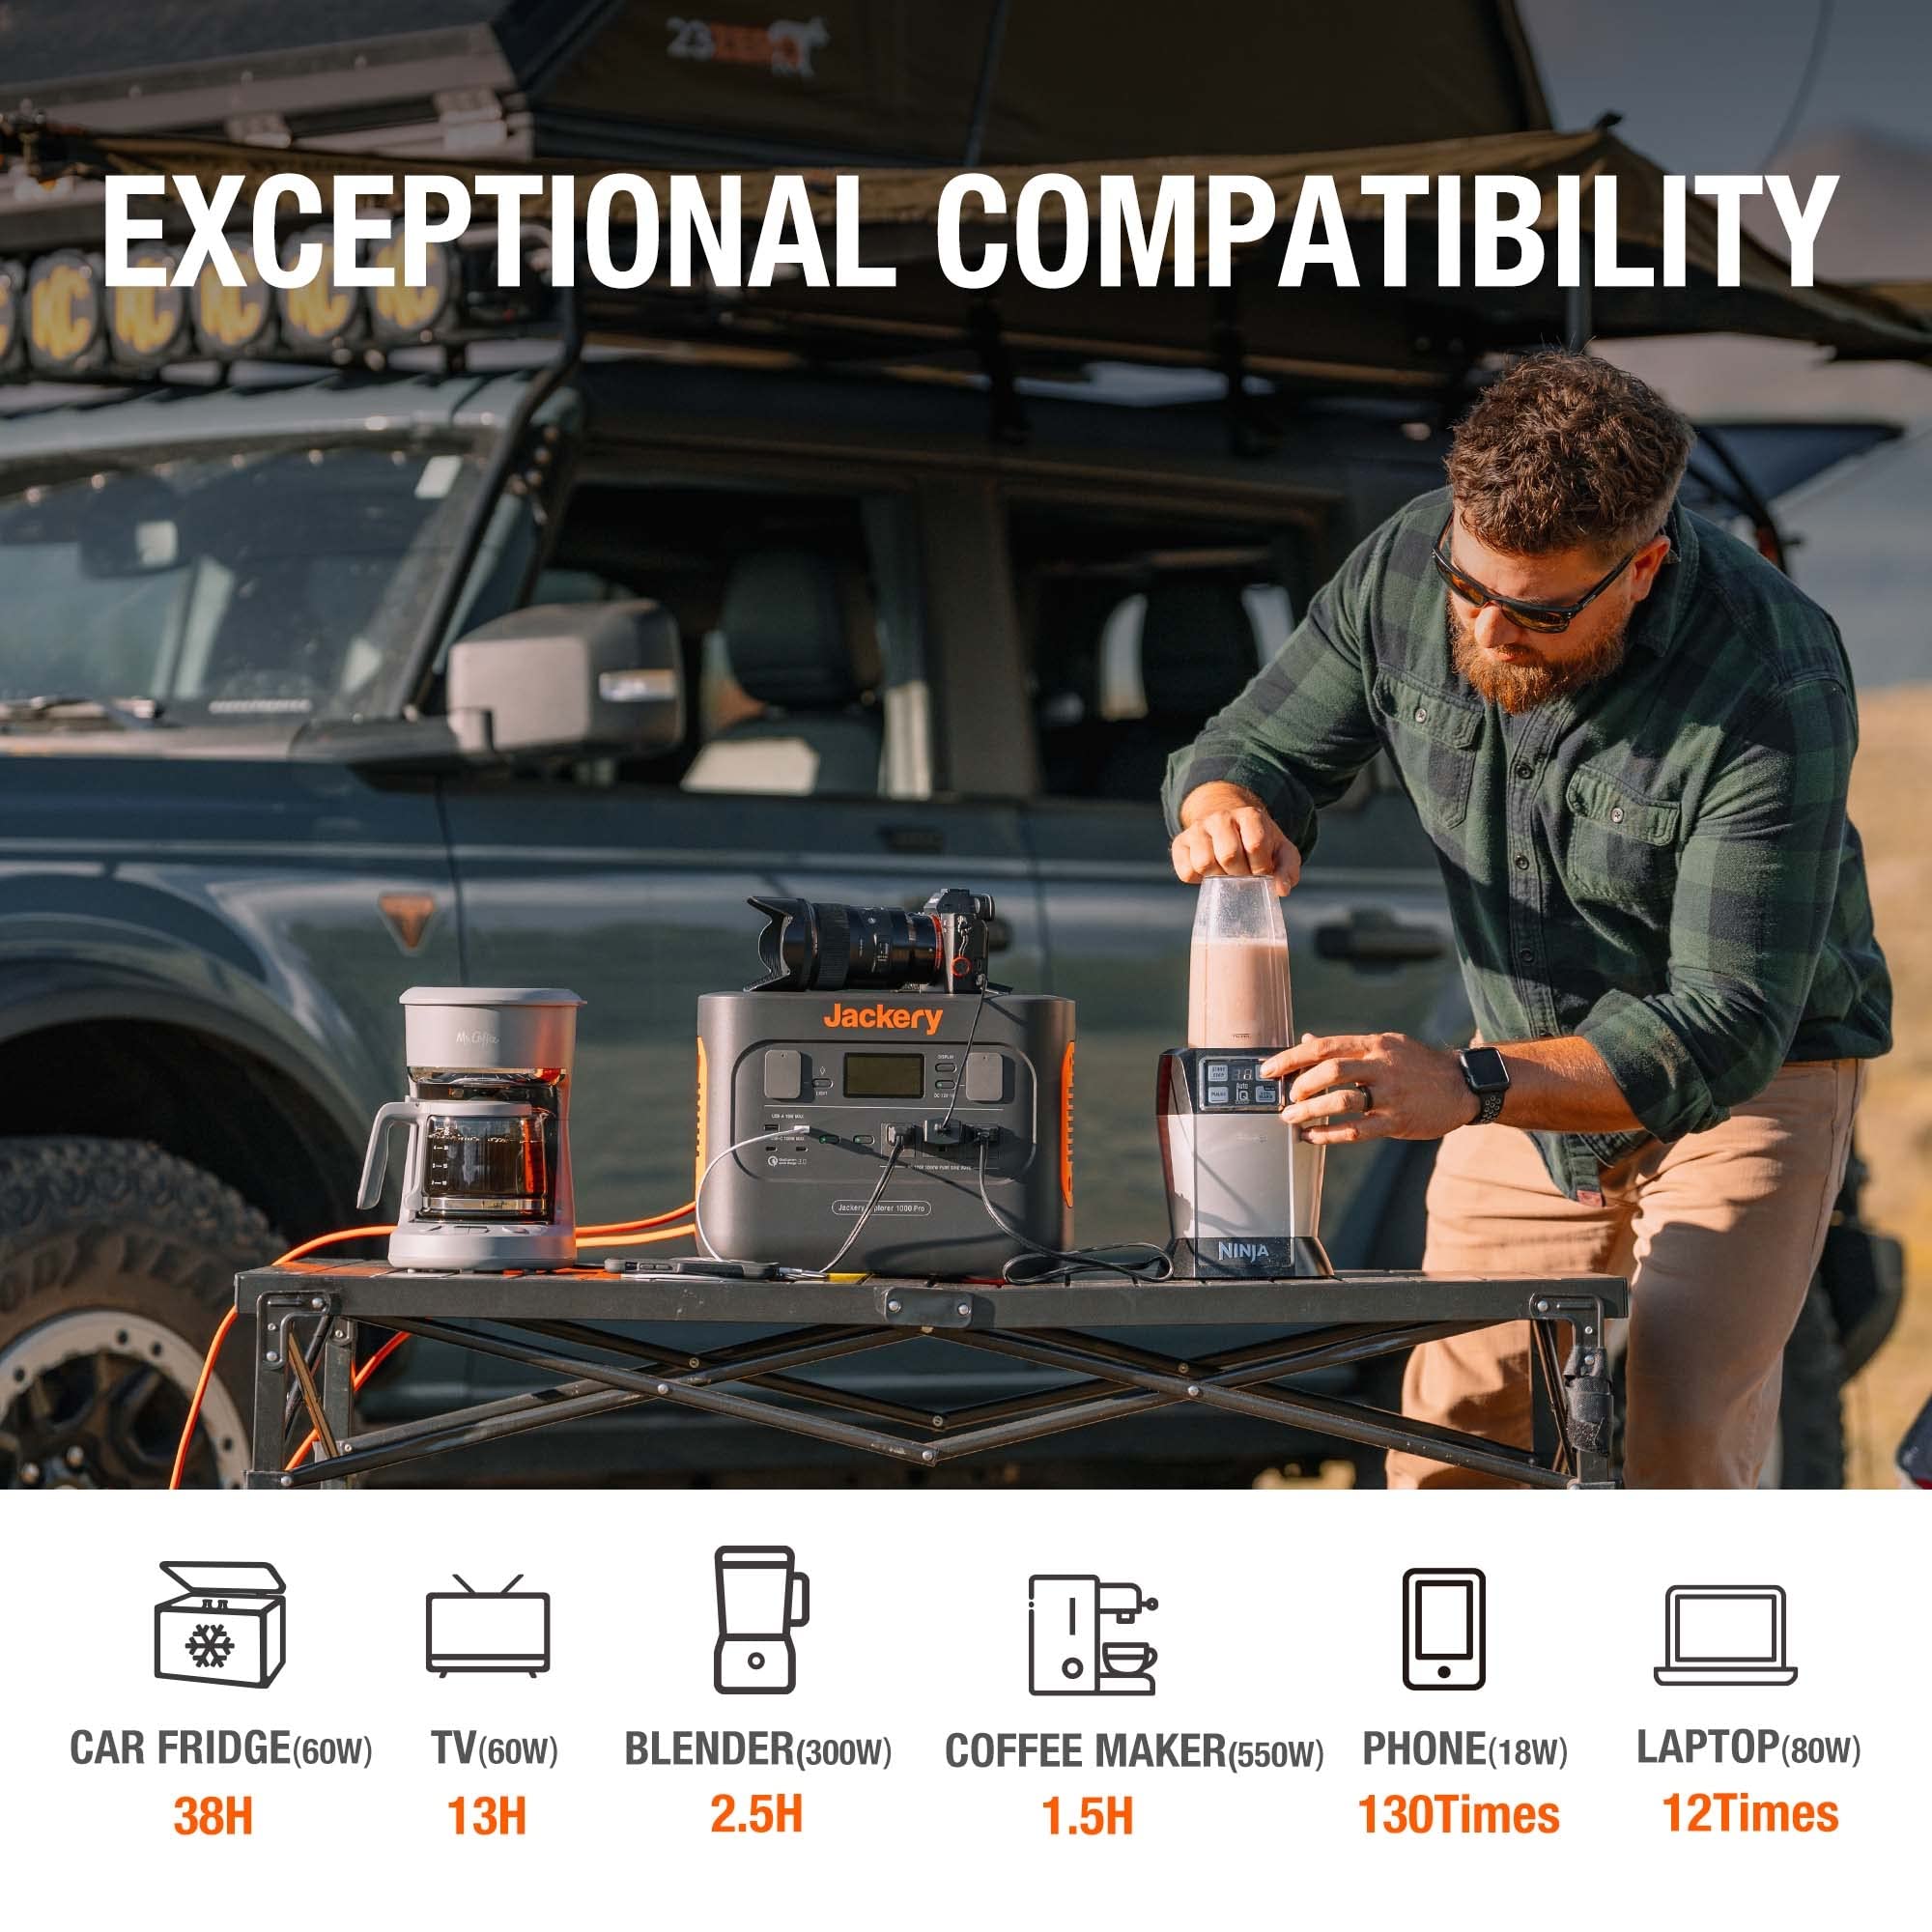 Jackery Explorer Portable Power Station, Solar Generator with 1002Wh, 2x100W PD Ports & 800W Input, 1.8H to Full Charge, Compatible with SolarSagas, for Outdoor RV, Camping, Emergencies